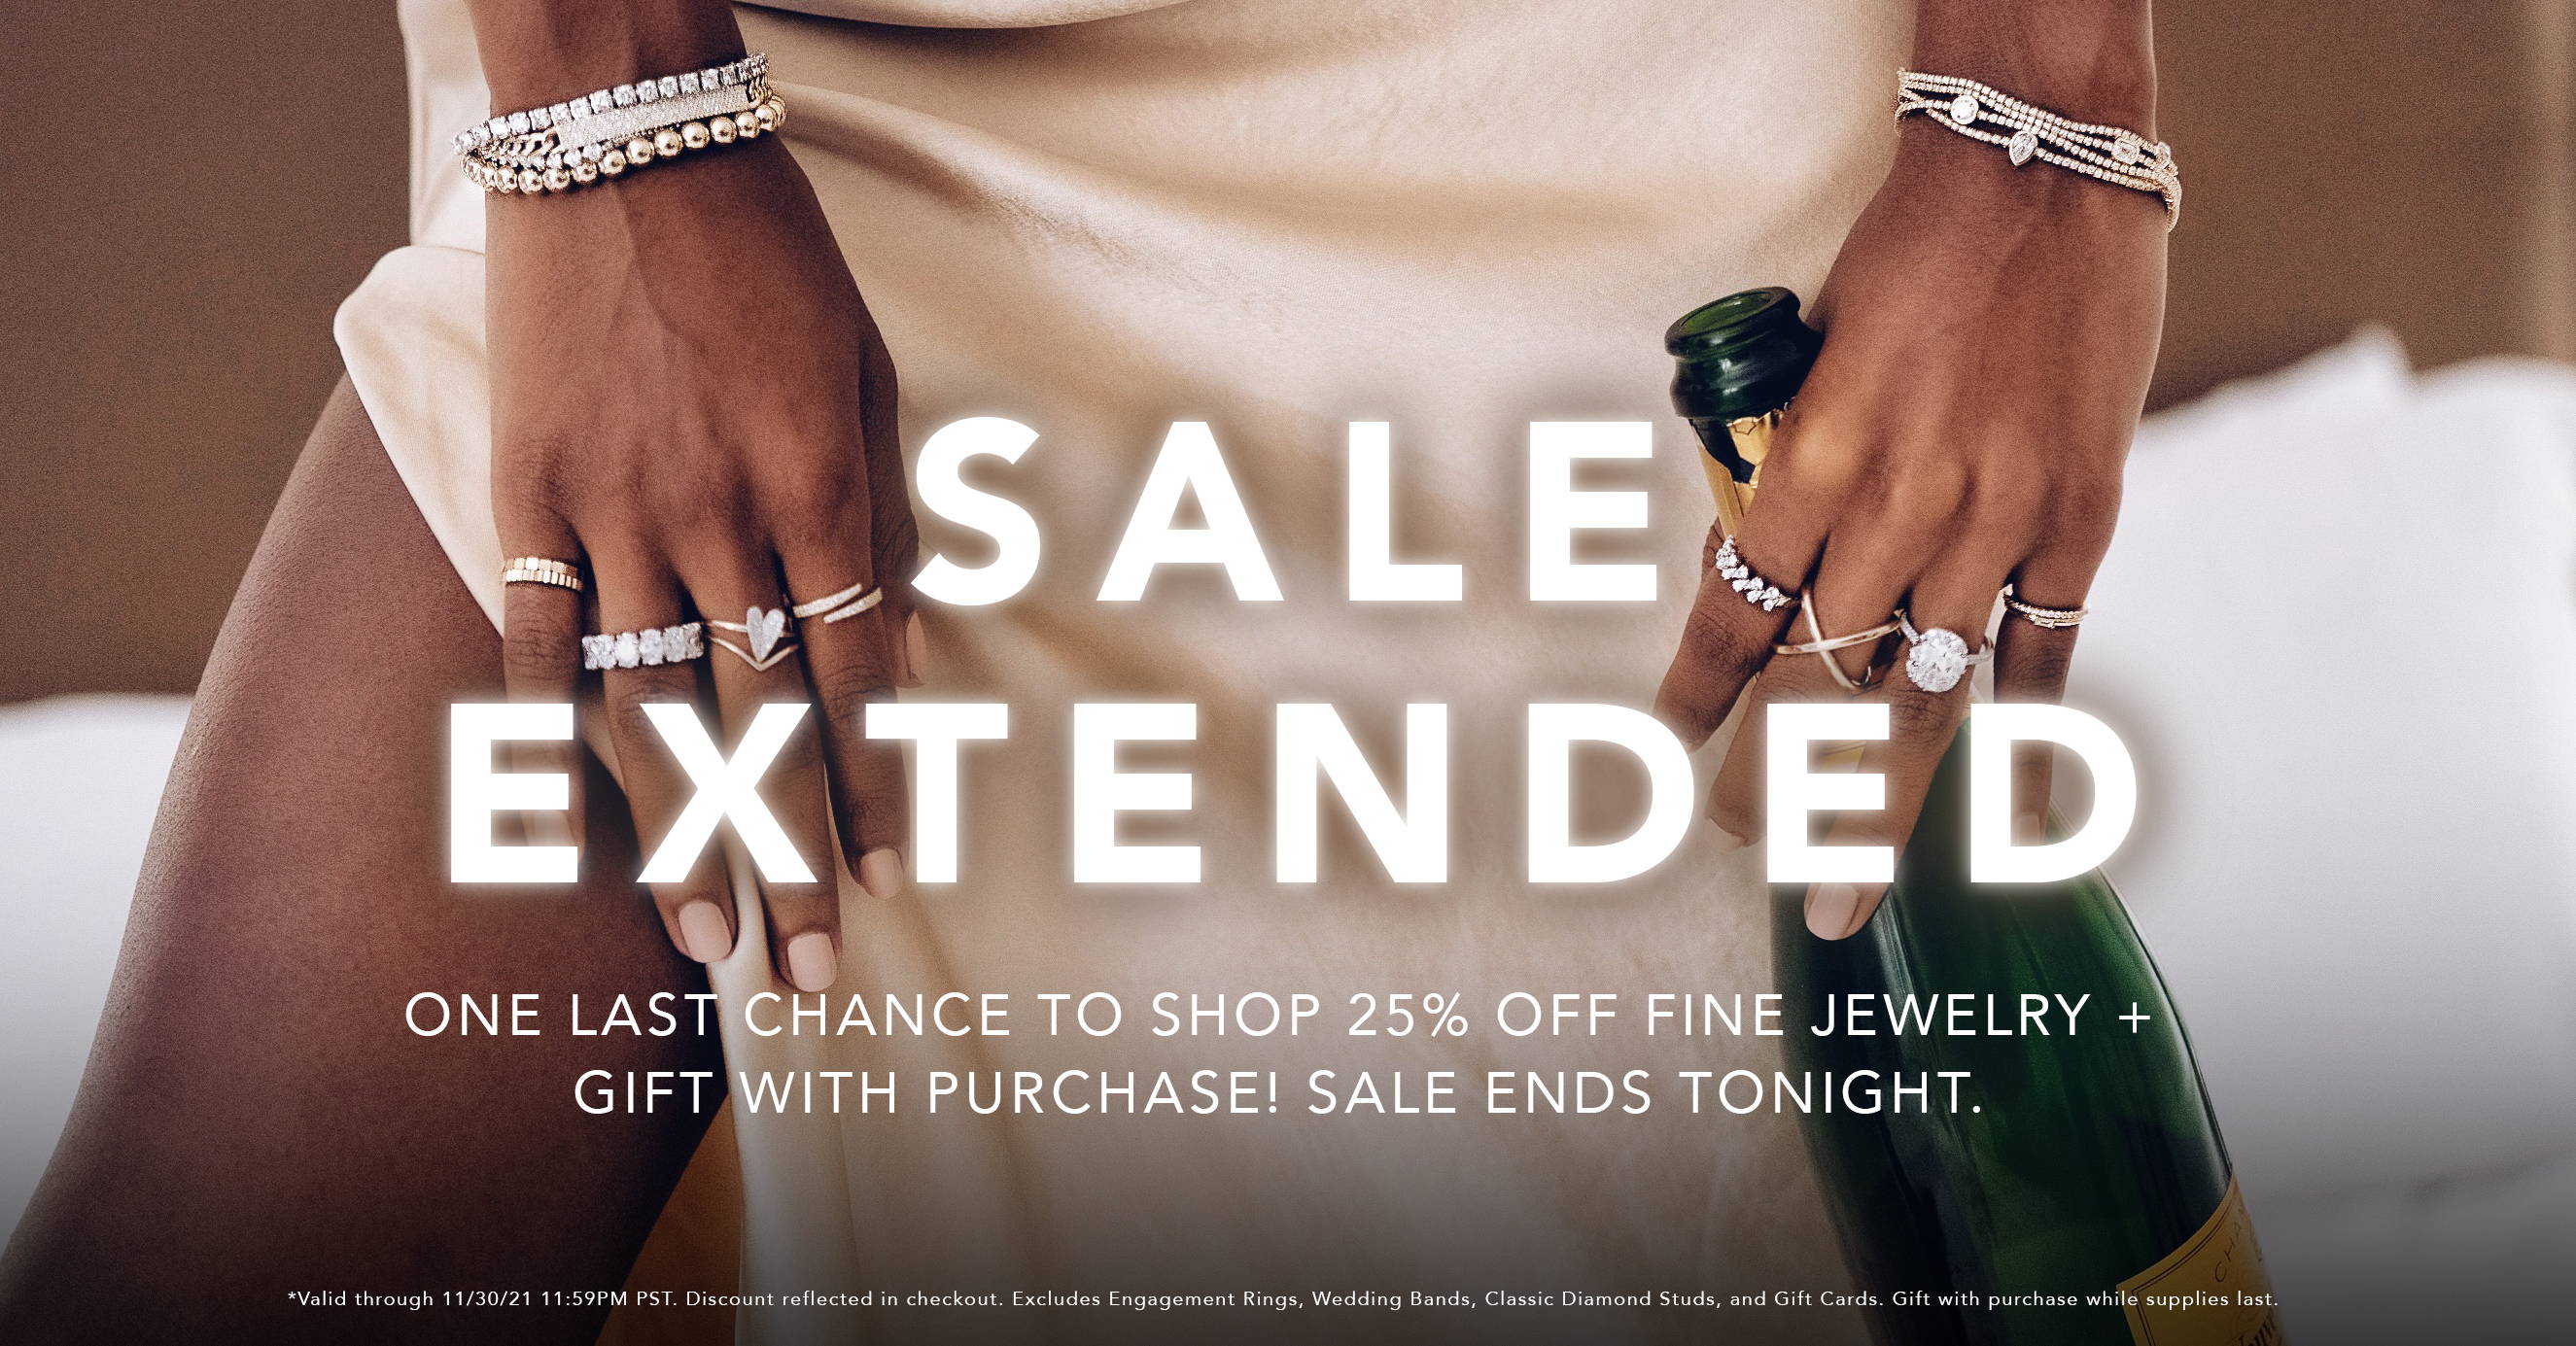 Sale extended! One last chance to shop 25% Off Fine Jewelry + Gift with Purchase! Sale ends tonight. *Valid 11/24/21 through 11/30/21 11:59PM pst. Discount reflected in checkout. Excludes Engagement Rings, Wedding Bands, Classic Diamond Studs, and Gift Cards. Gift with purchase while supplies last.